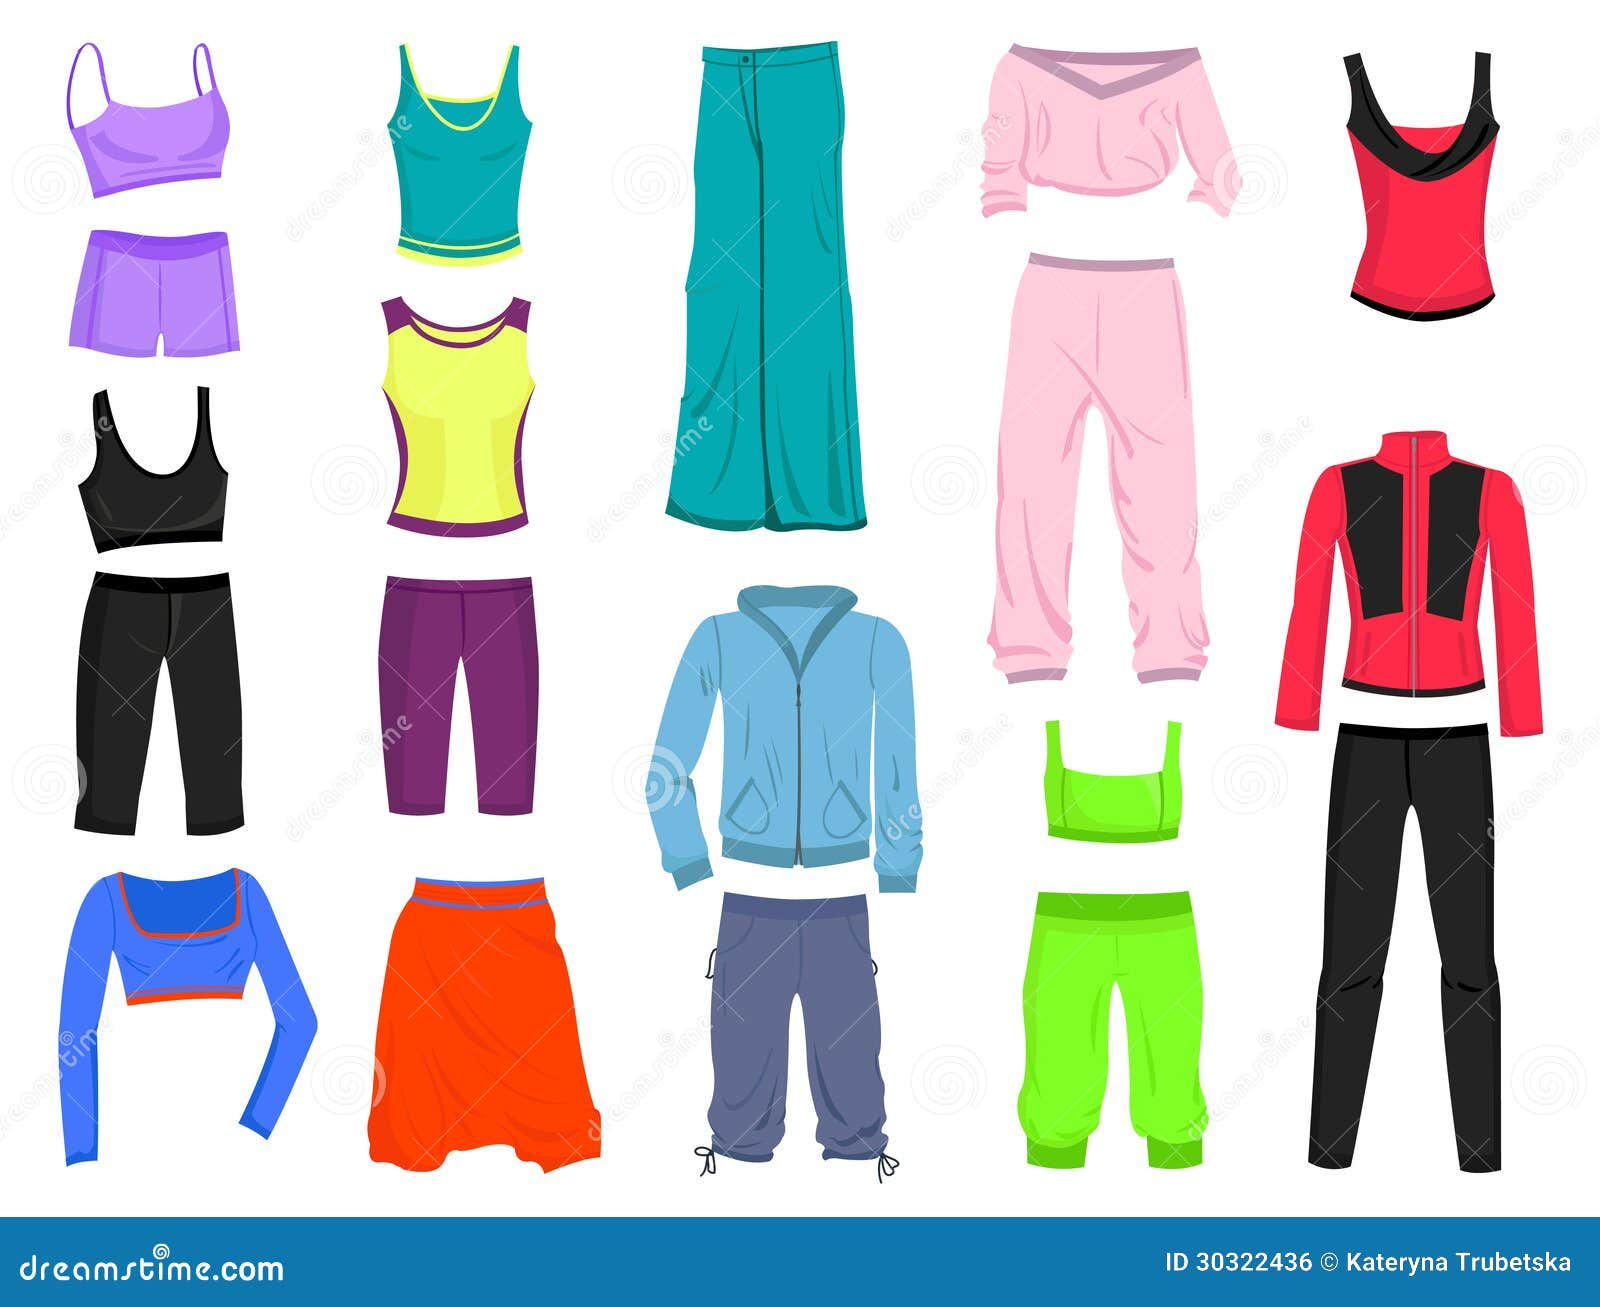 Fitness Clothing Stock Illustrations – 27,985 Fitness Clothing